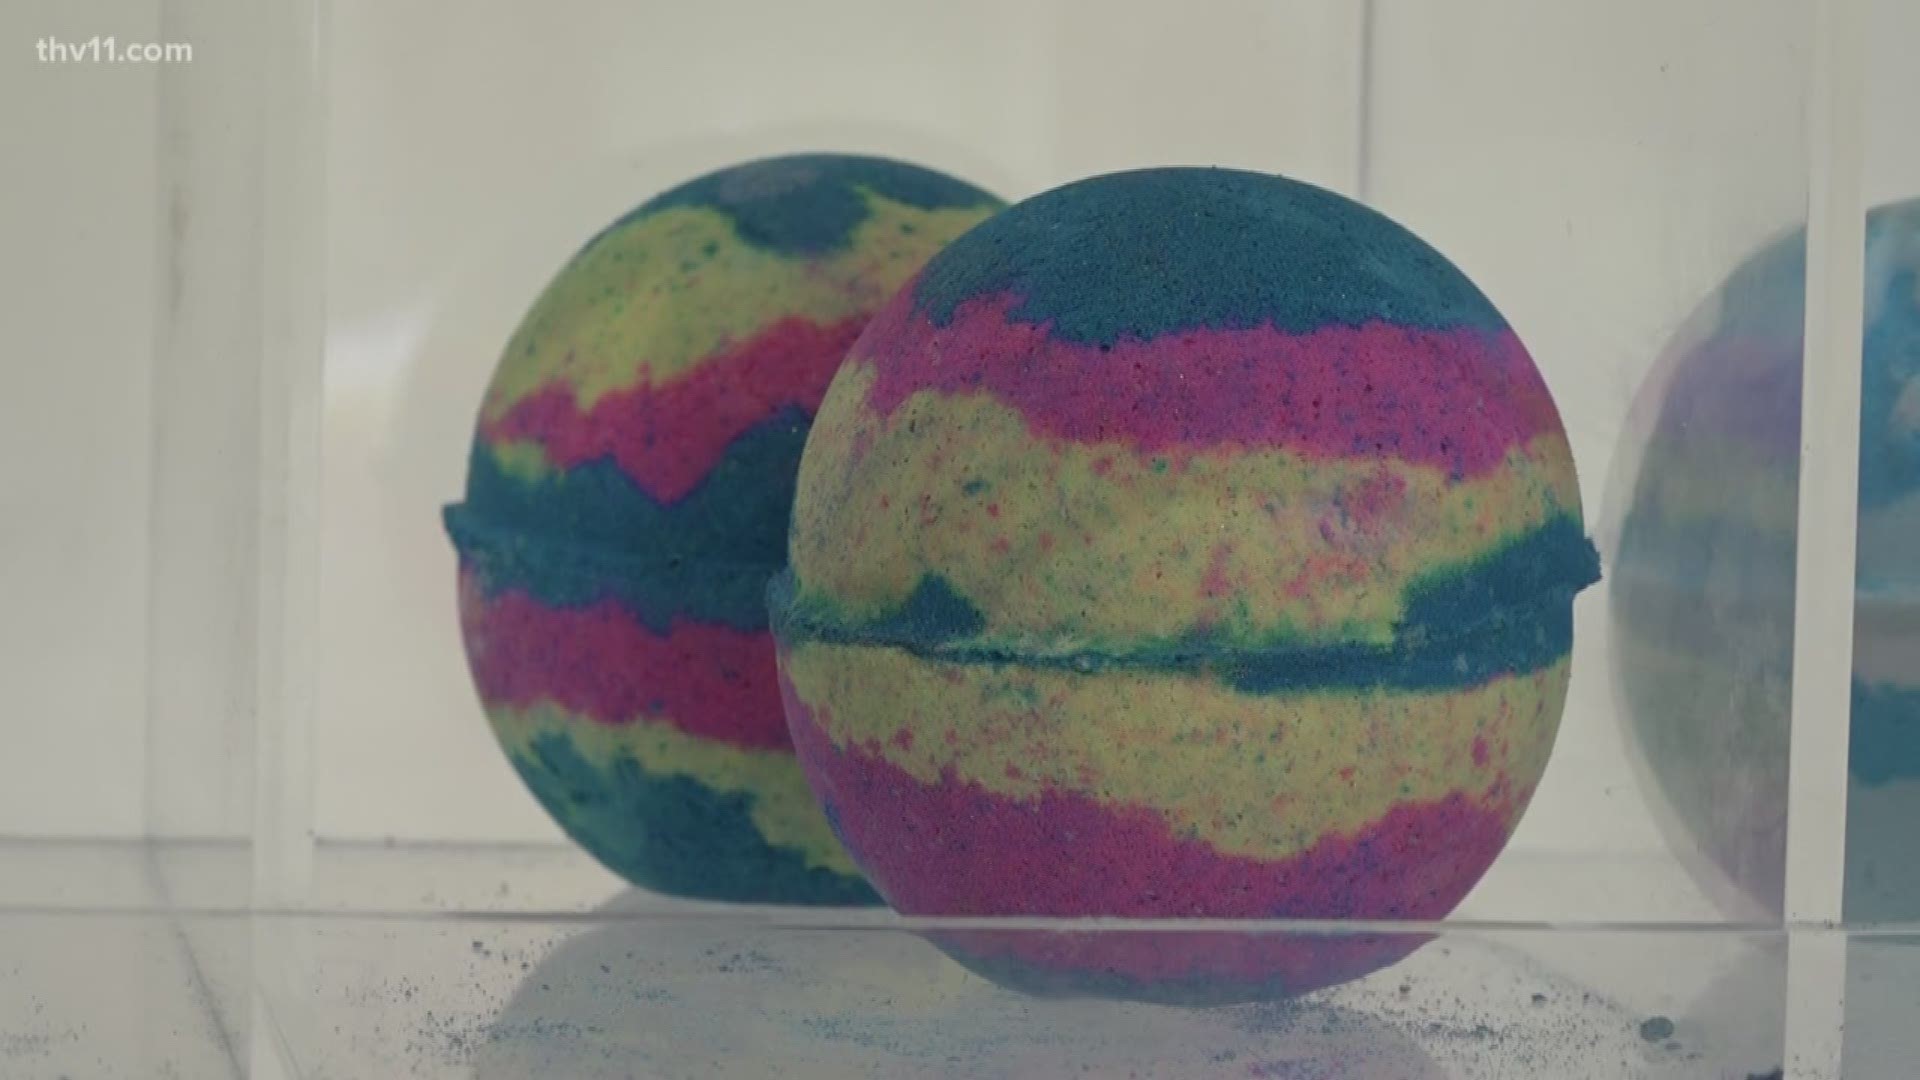 Lush is celebrating the 30th anniversary of the bath bomb. Every single one is handmade with natural ingredients.